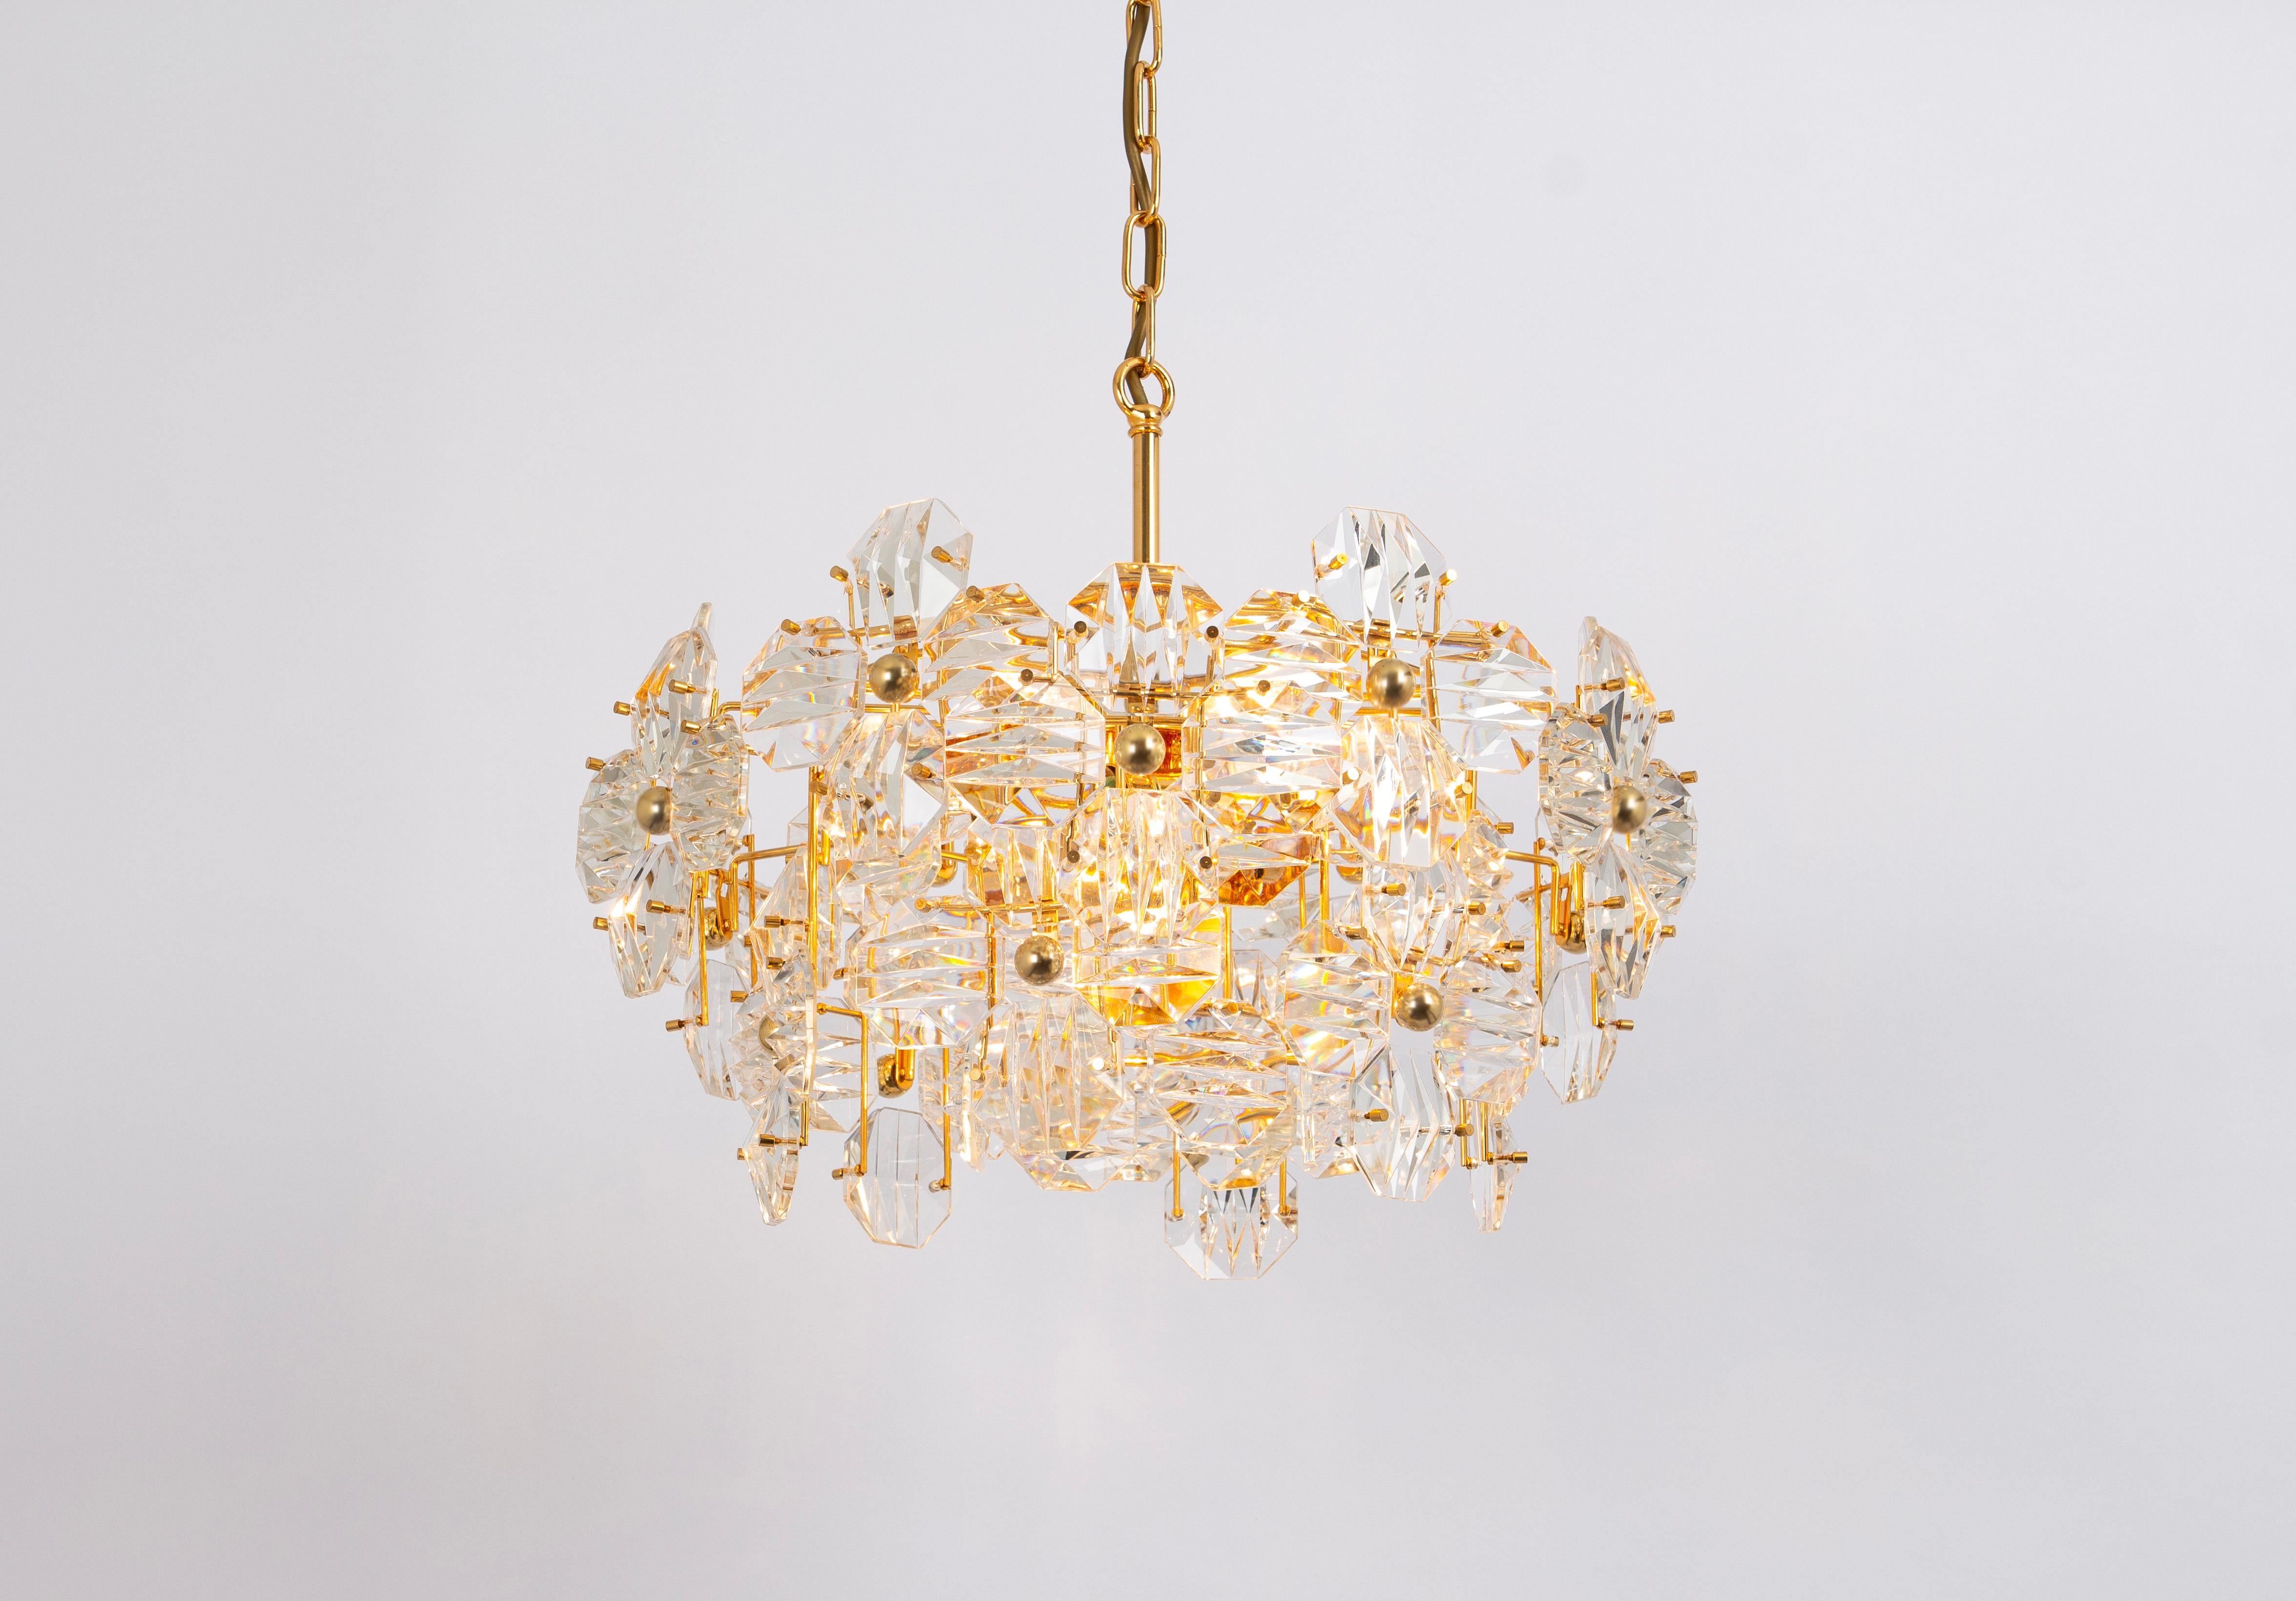 Mid-Century Modern 1 of 2 Stunning Chandelier, Brass and Crystal Glass by Kinkeldey, Germany, 1970s For Sale